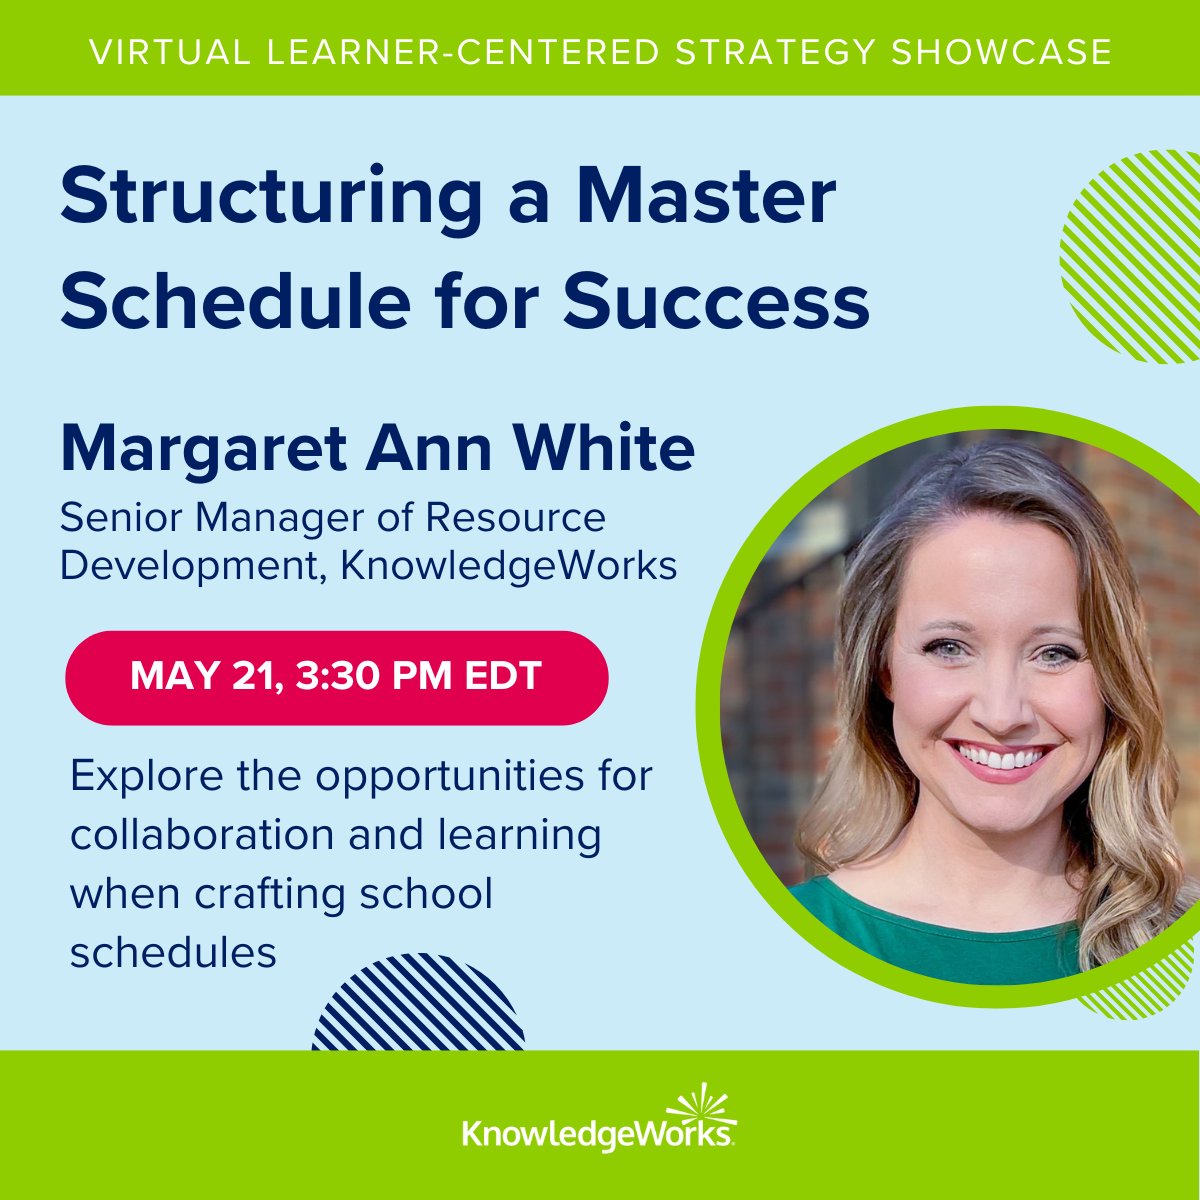 Join us & the #LeadingChange Community on 5/21 for a 30-min virtual Learner-Centered Strategy Showcase with Margaret Ann White. Learn crafting effective master schedules enhancing collaboration & learning outcomes for educators & learners! Register: [link]